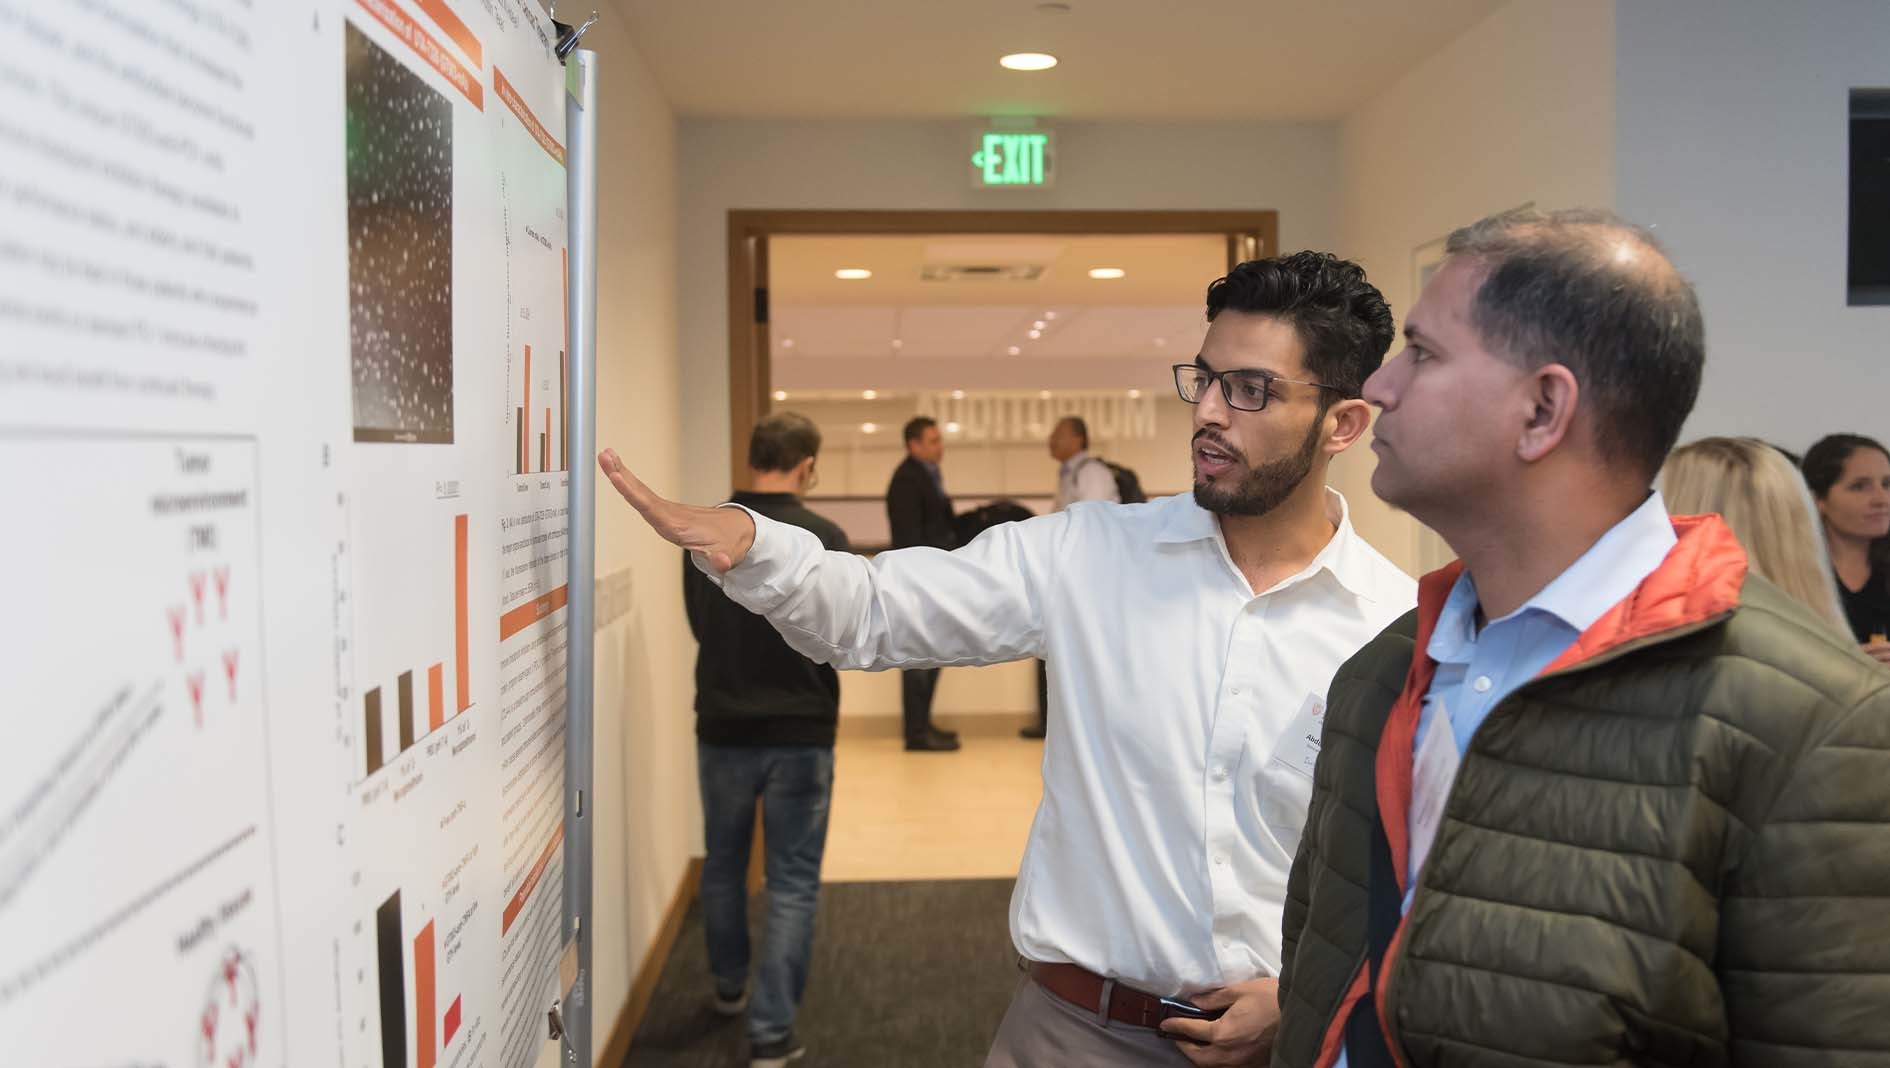 Two individuals discussing a project poster.